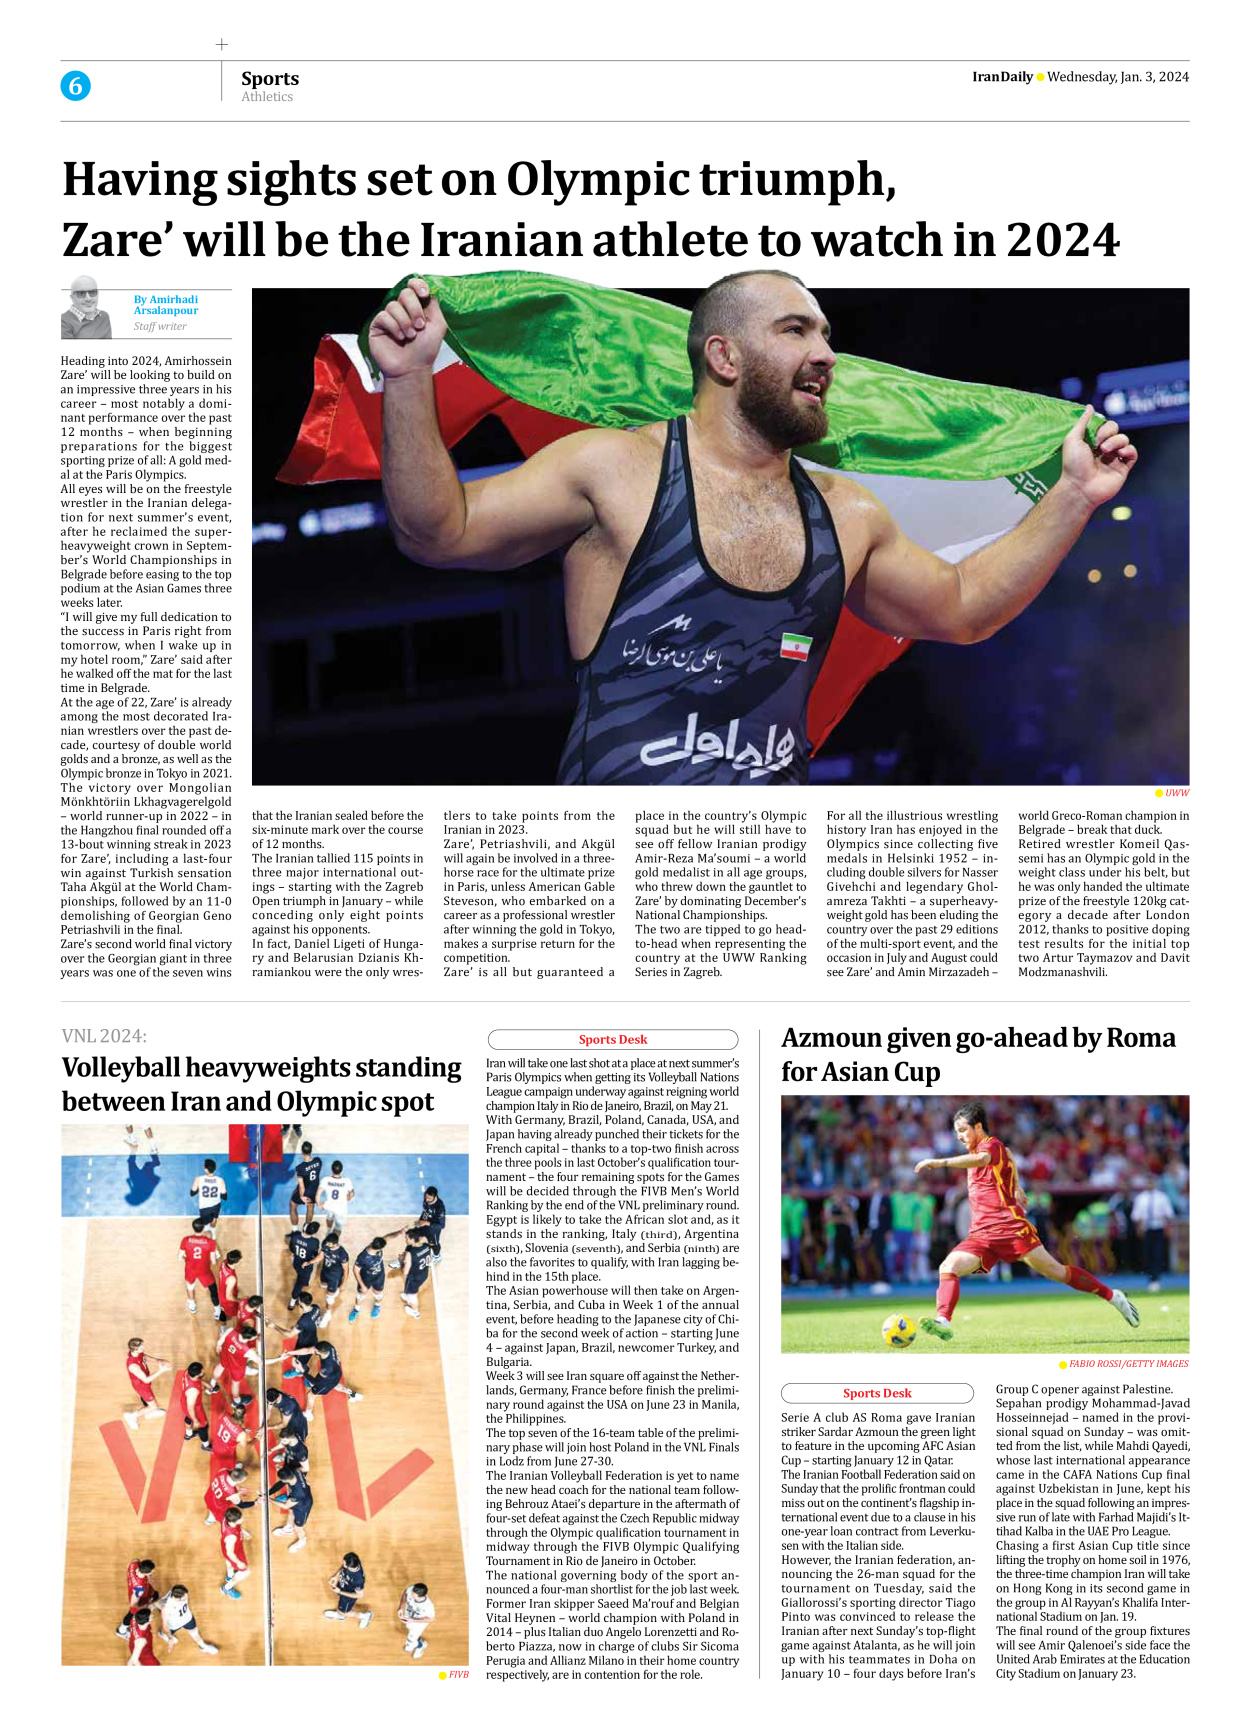 Iran Daily - Number Seven Thousand Four Hundred and Seventy Five - 03 January 2024 - Page 6